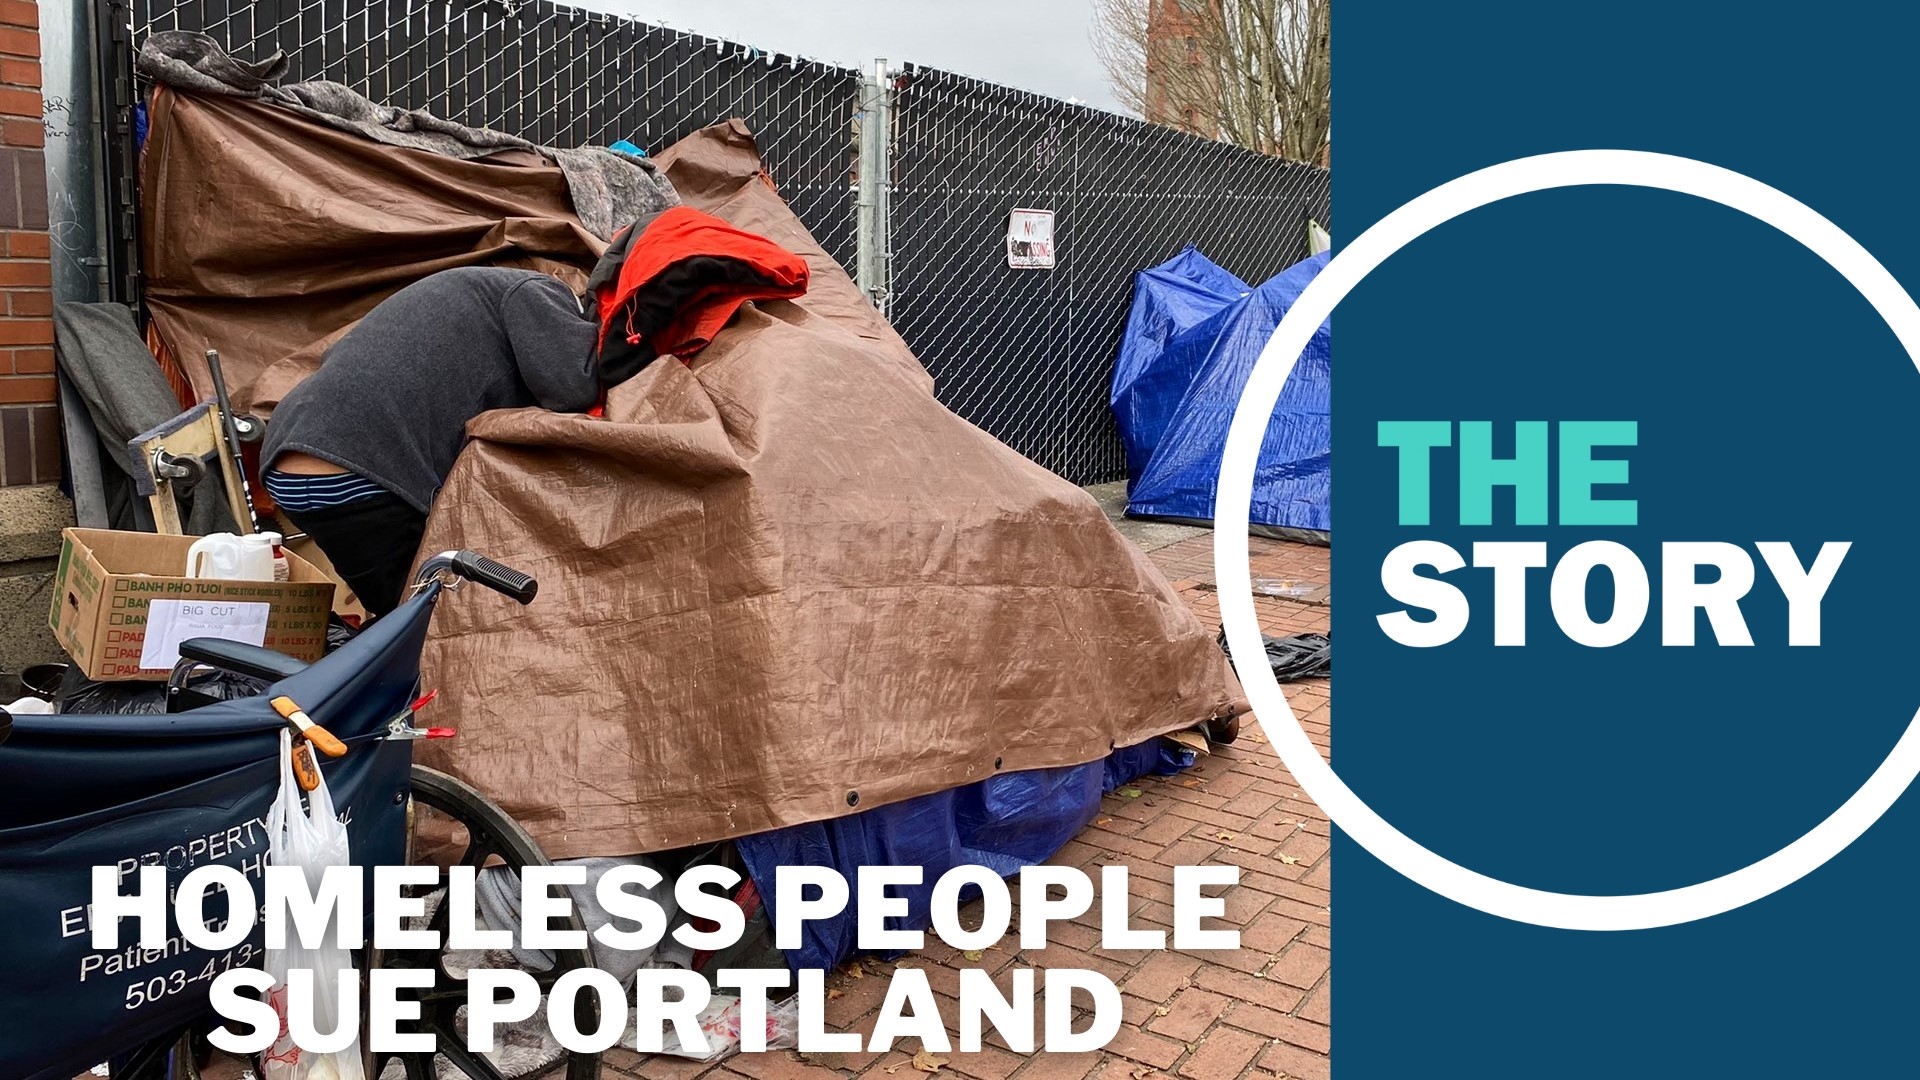 The Oregon Law Center is representing homeless people in a class action suit against the city of Portland before the latter begins handing out penalties to campers.